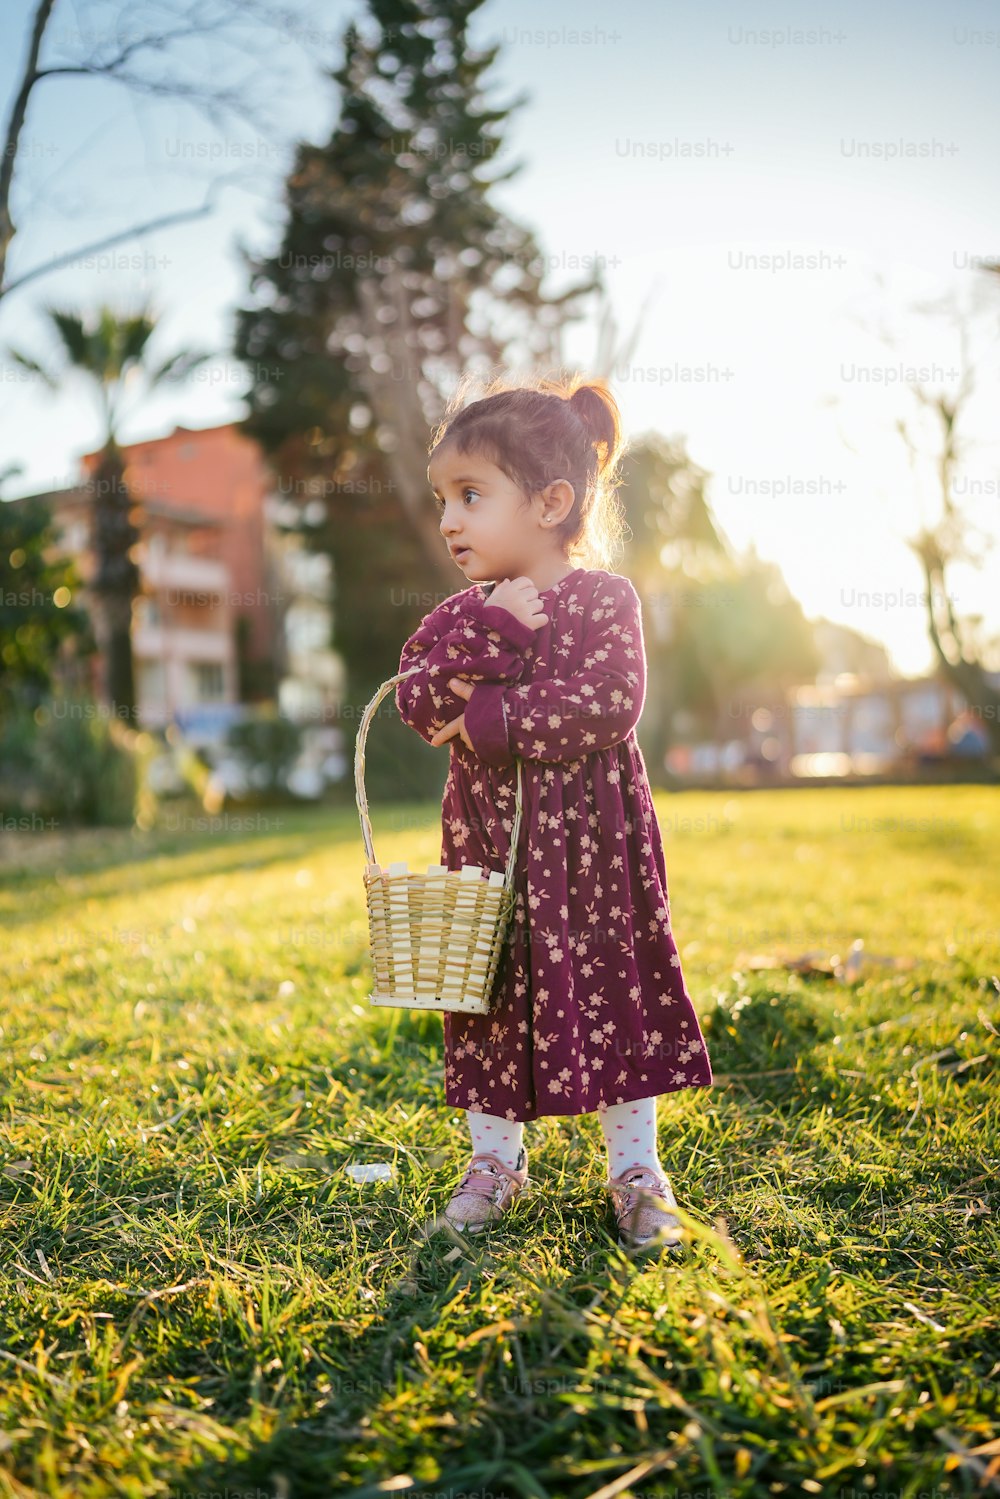 a little girl standing in the grass holding a basket